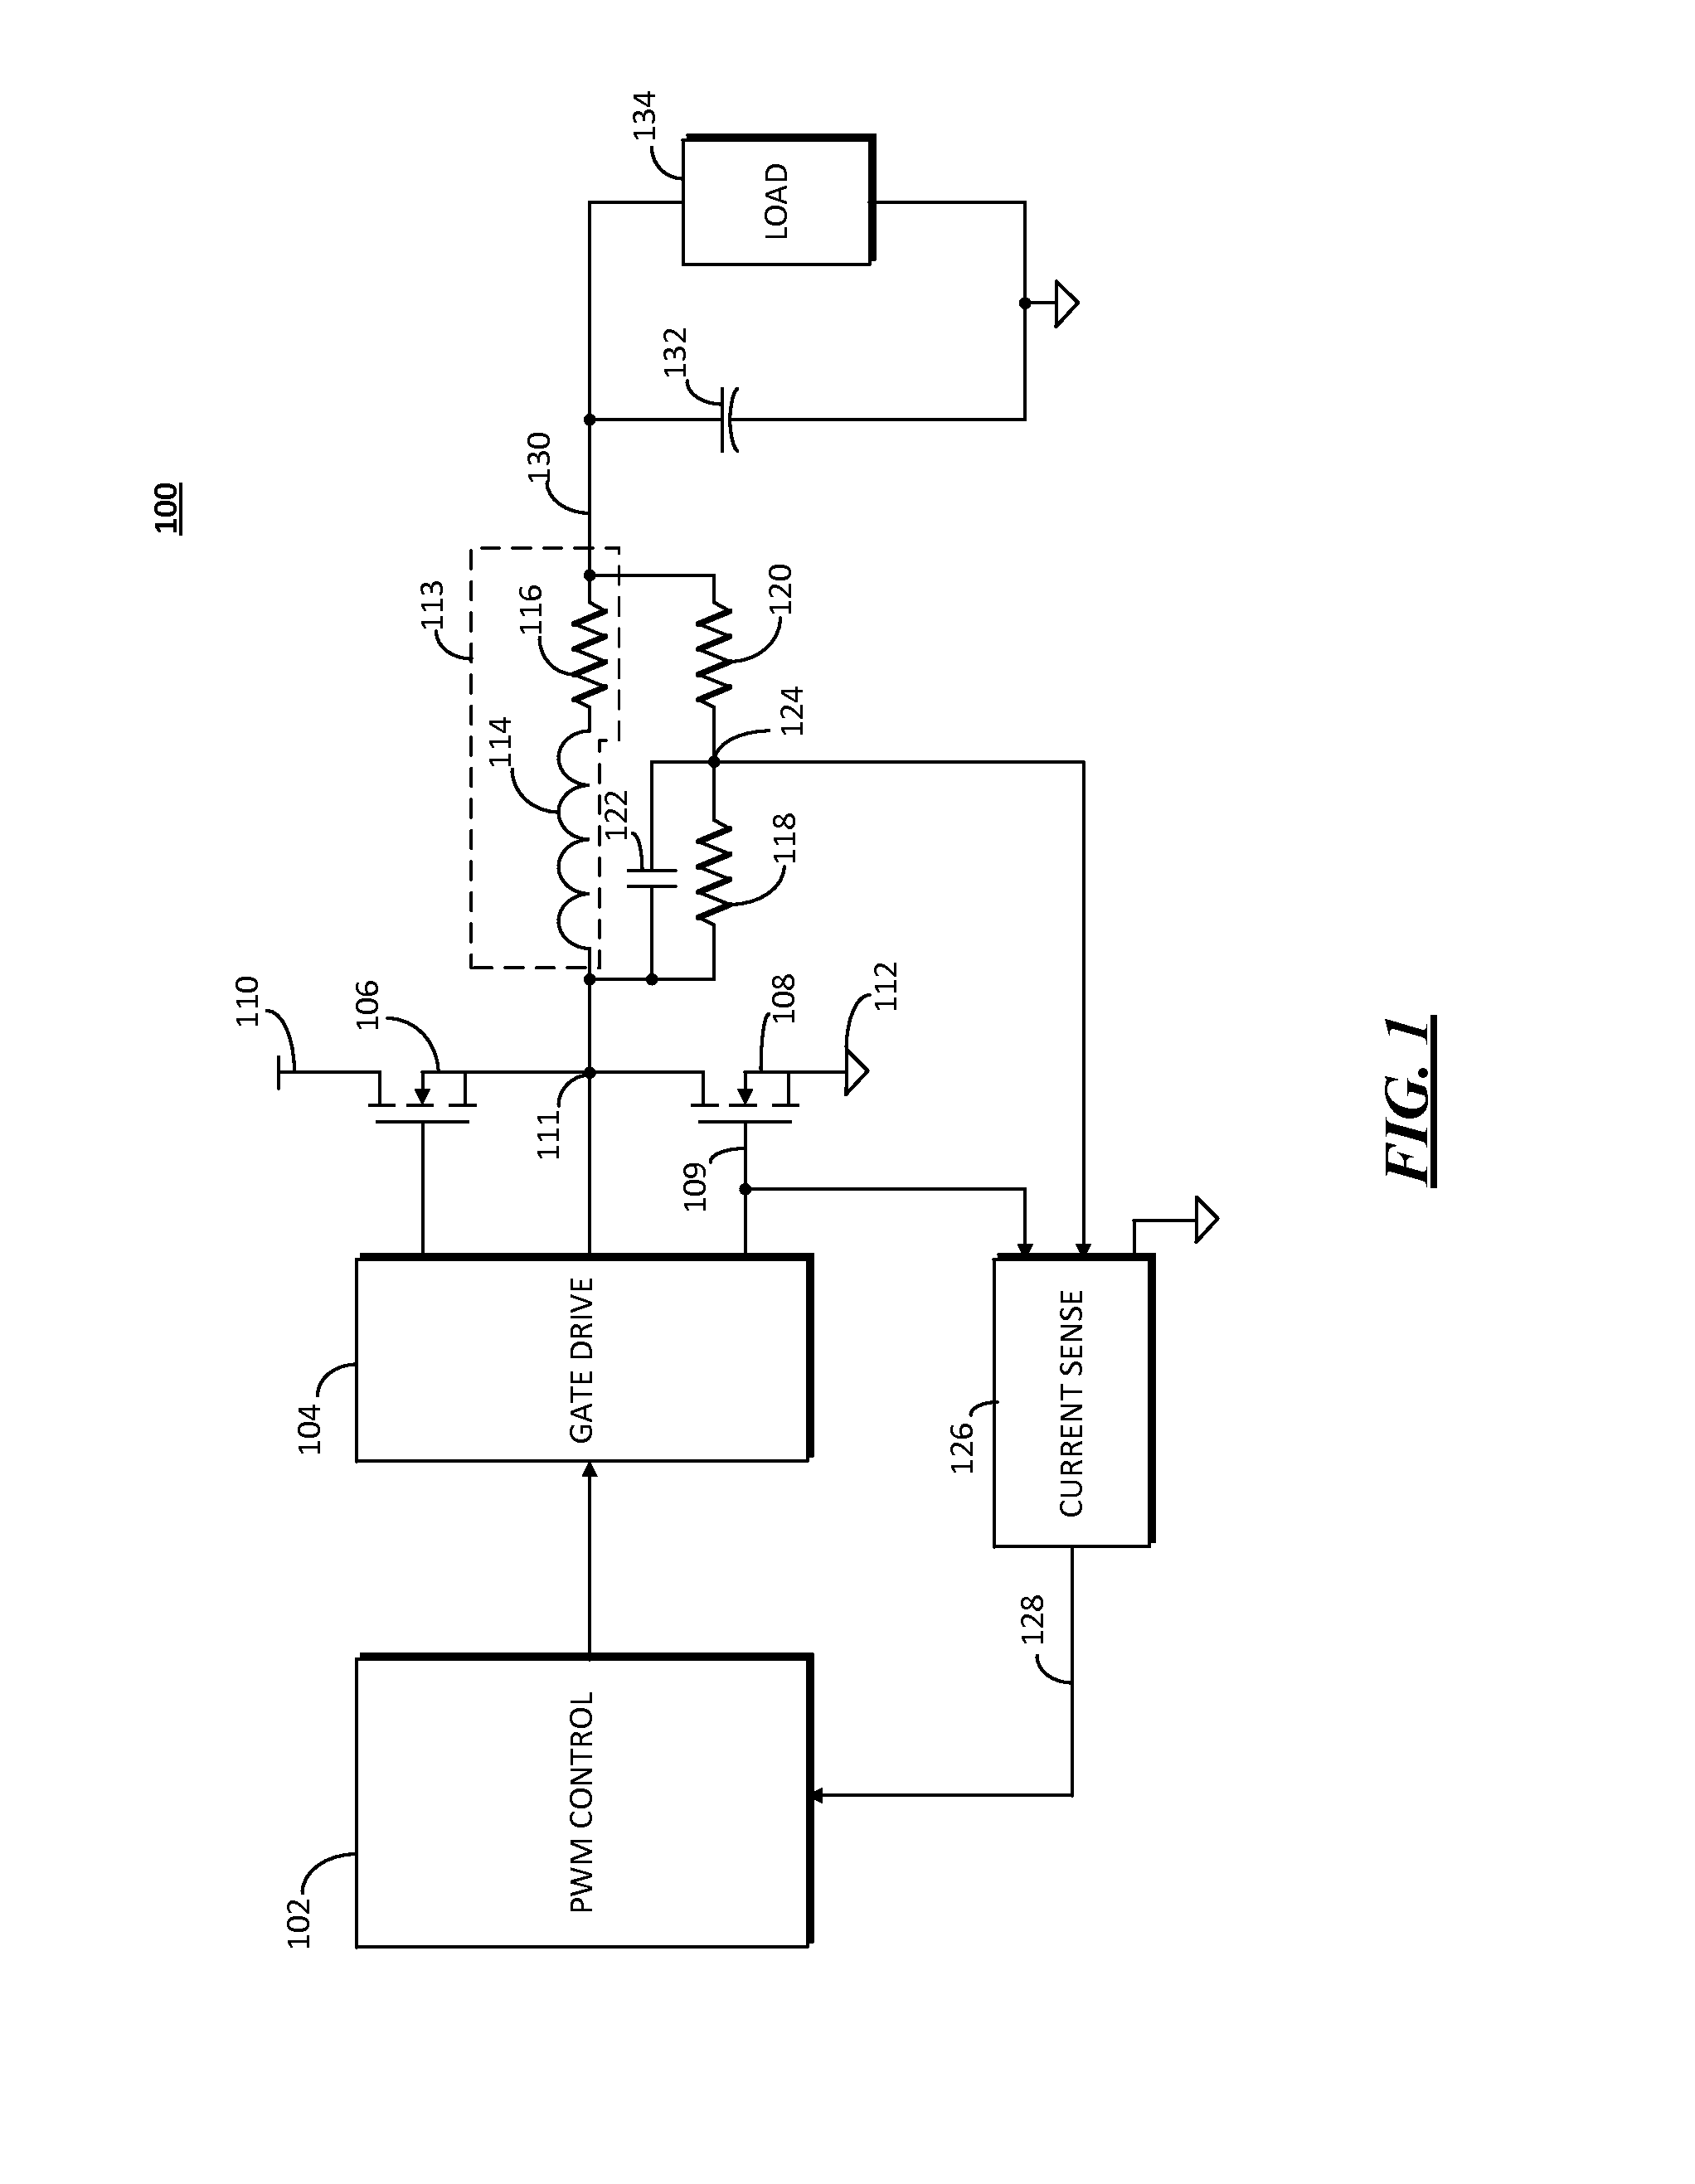 Current sensing circuit for switching power converters